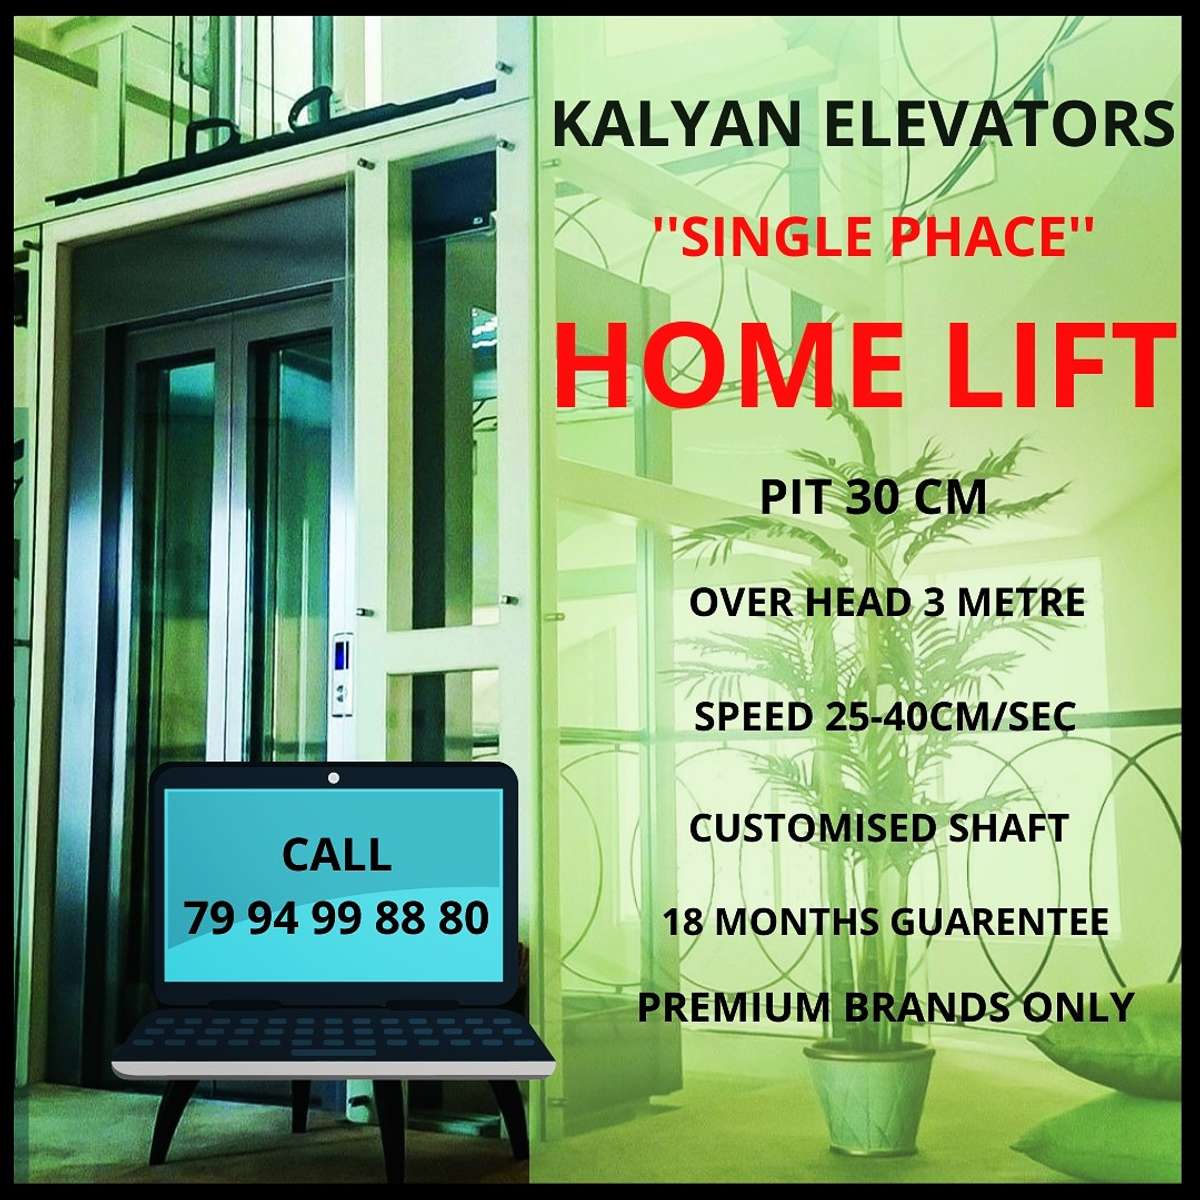 Kalyan Home Elevators offers the long-awaited solution to vertical mobility within homes at affordable prices and easy-to-use features. Our customized and aesthetically designed home lifts are easily installable in preexisting homes as well as houses under construction, and help you relieve the headache of climbing. More details:- callxxxxxxxxxxx

we do all kind of :-
Home Lifts
Hospital Lifts
Capsule Lifts
Commercial Lifts
Customised Passenger Lifts
Car Lifts
Parking Lifts